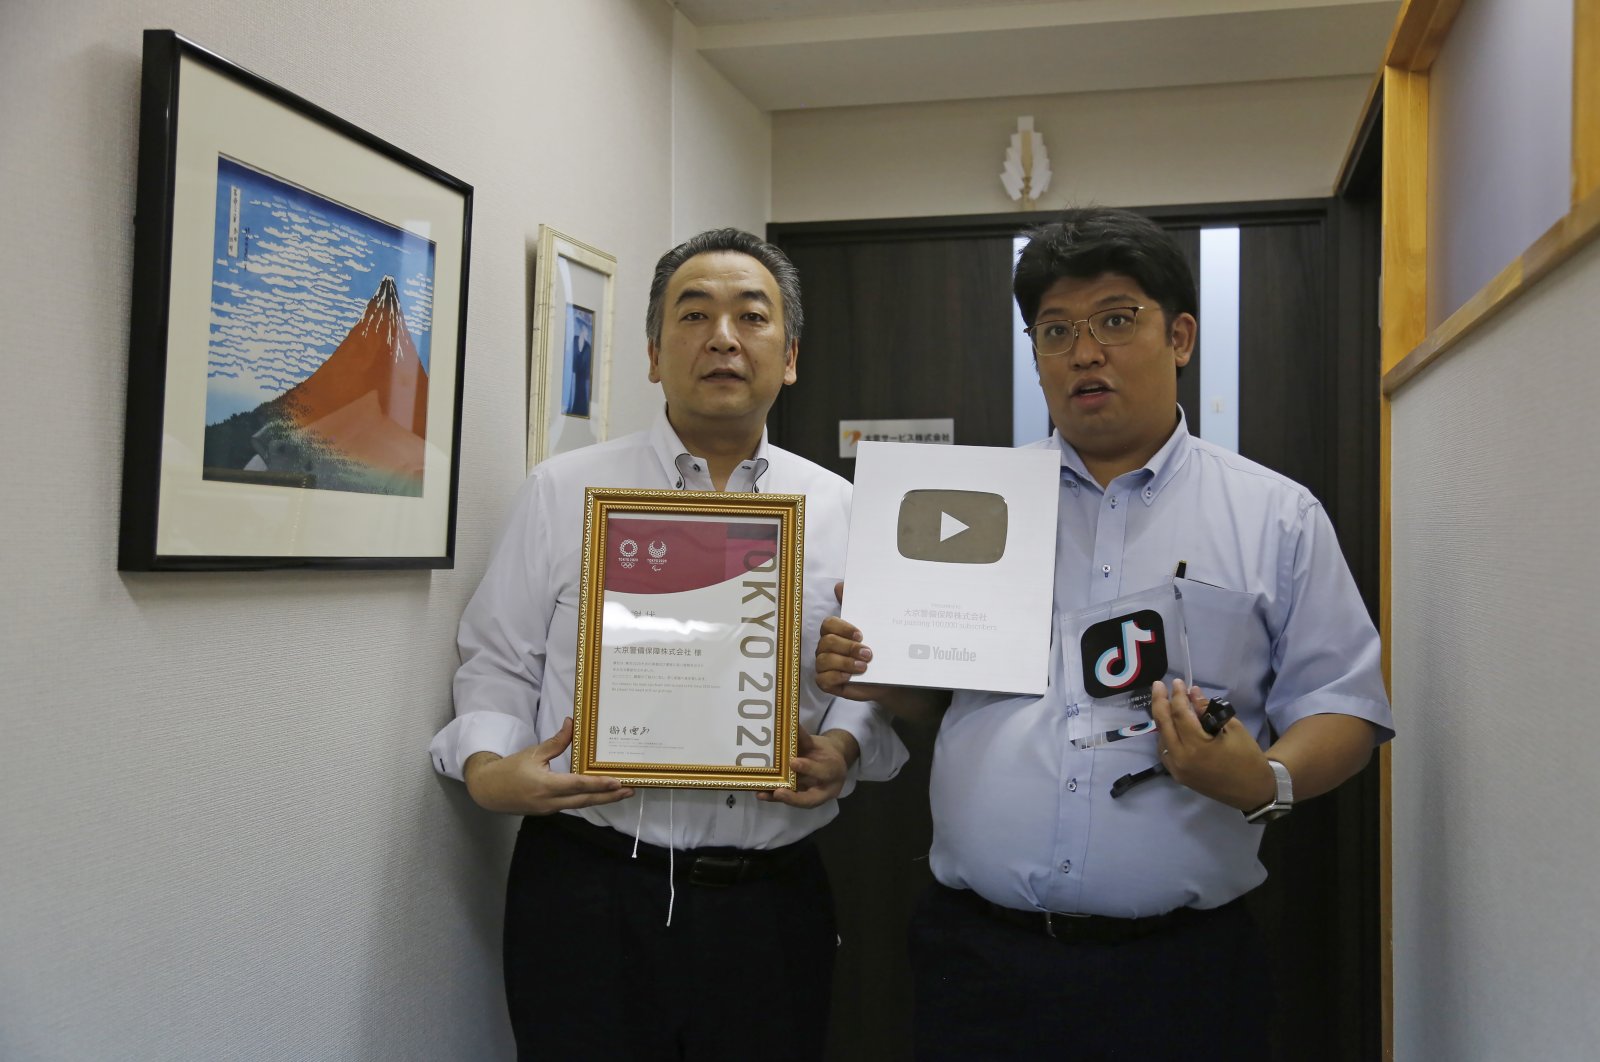 Daikyo Security Chief Executive Daisuke Sakurai (R), and General Manager Tomohiko Kojima hold the awards they have won recently for their Tik Tok videos in the hallway of their Tokyo headquarters office of Daikyo Security Co. Tokyo, Japan, Aug. 22, 2022. (AP Photo)